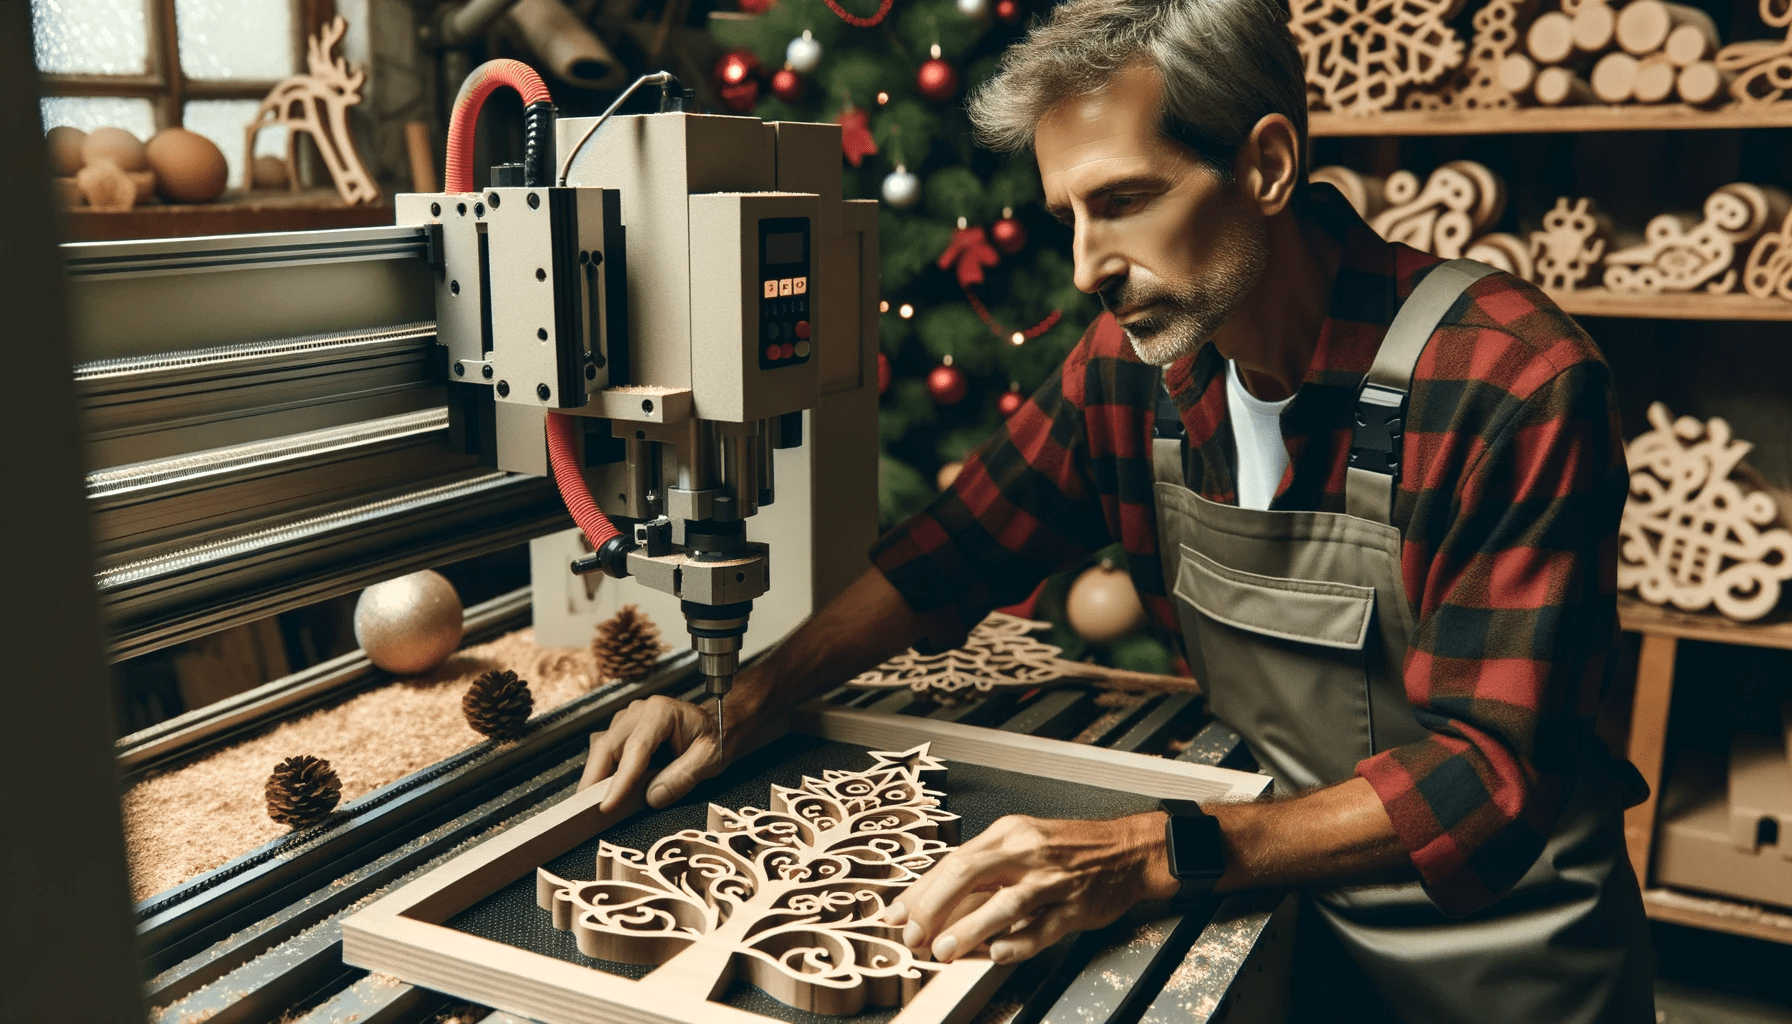 Middle-aged man in a workshop, intently working with a CNC machine to create a wooden Christmas-themed artifact. The environment is filled